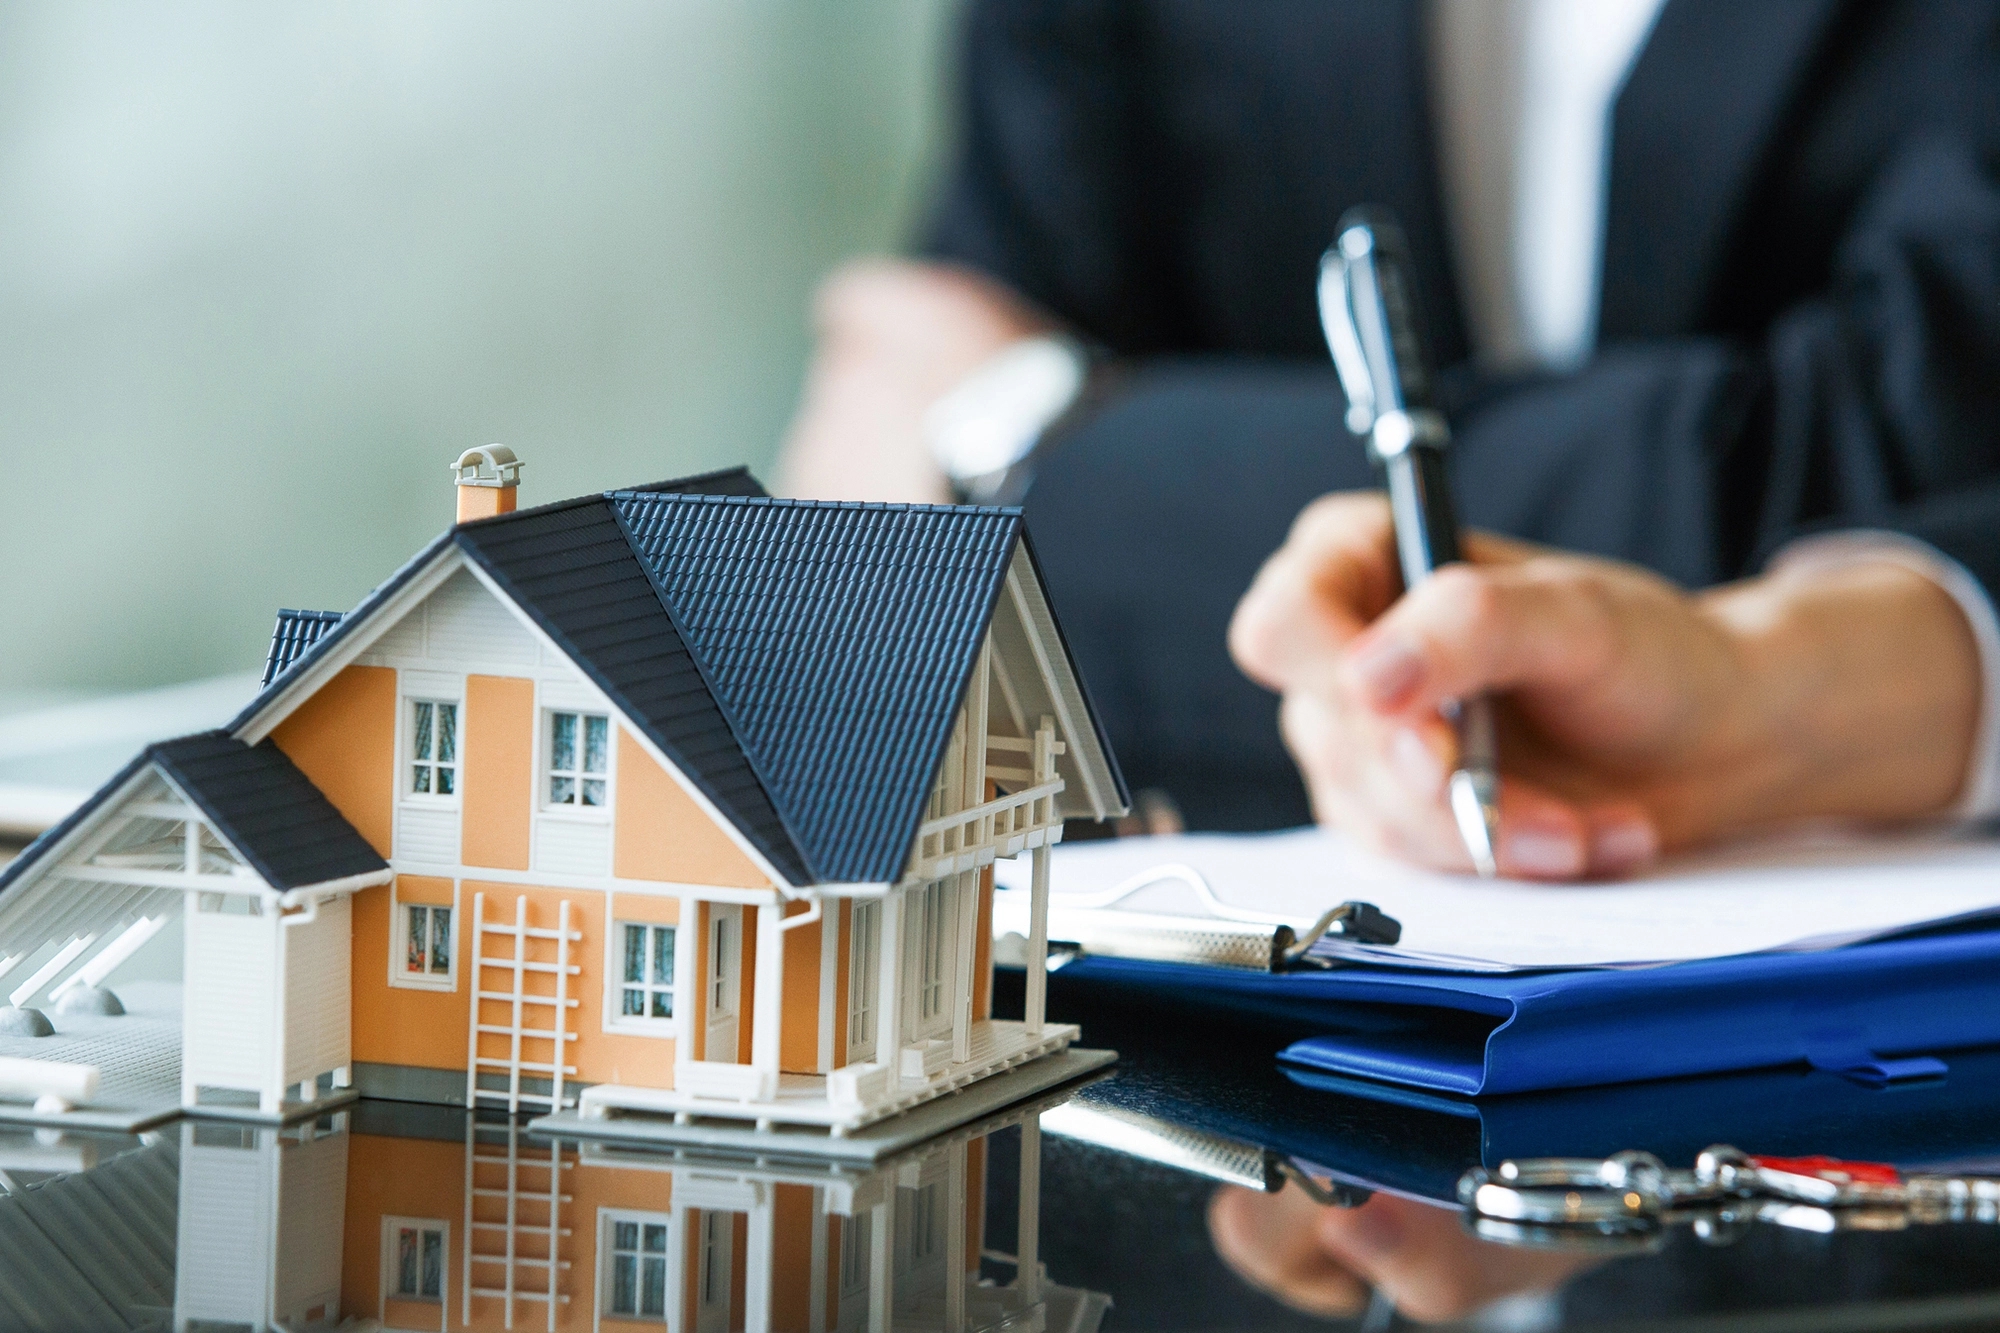 What Makes The Single Family Affordable Rental Property Loan Renowned?